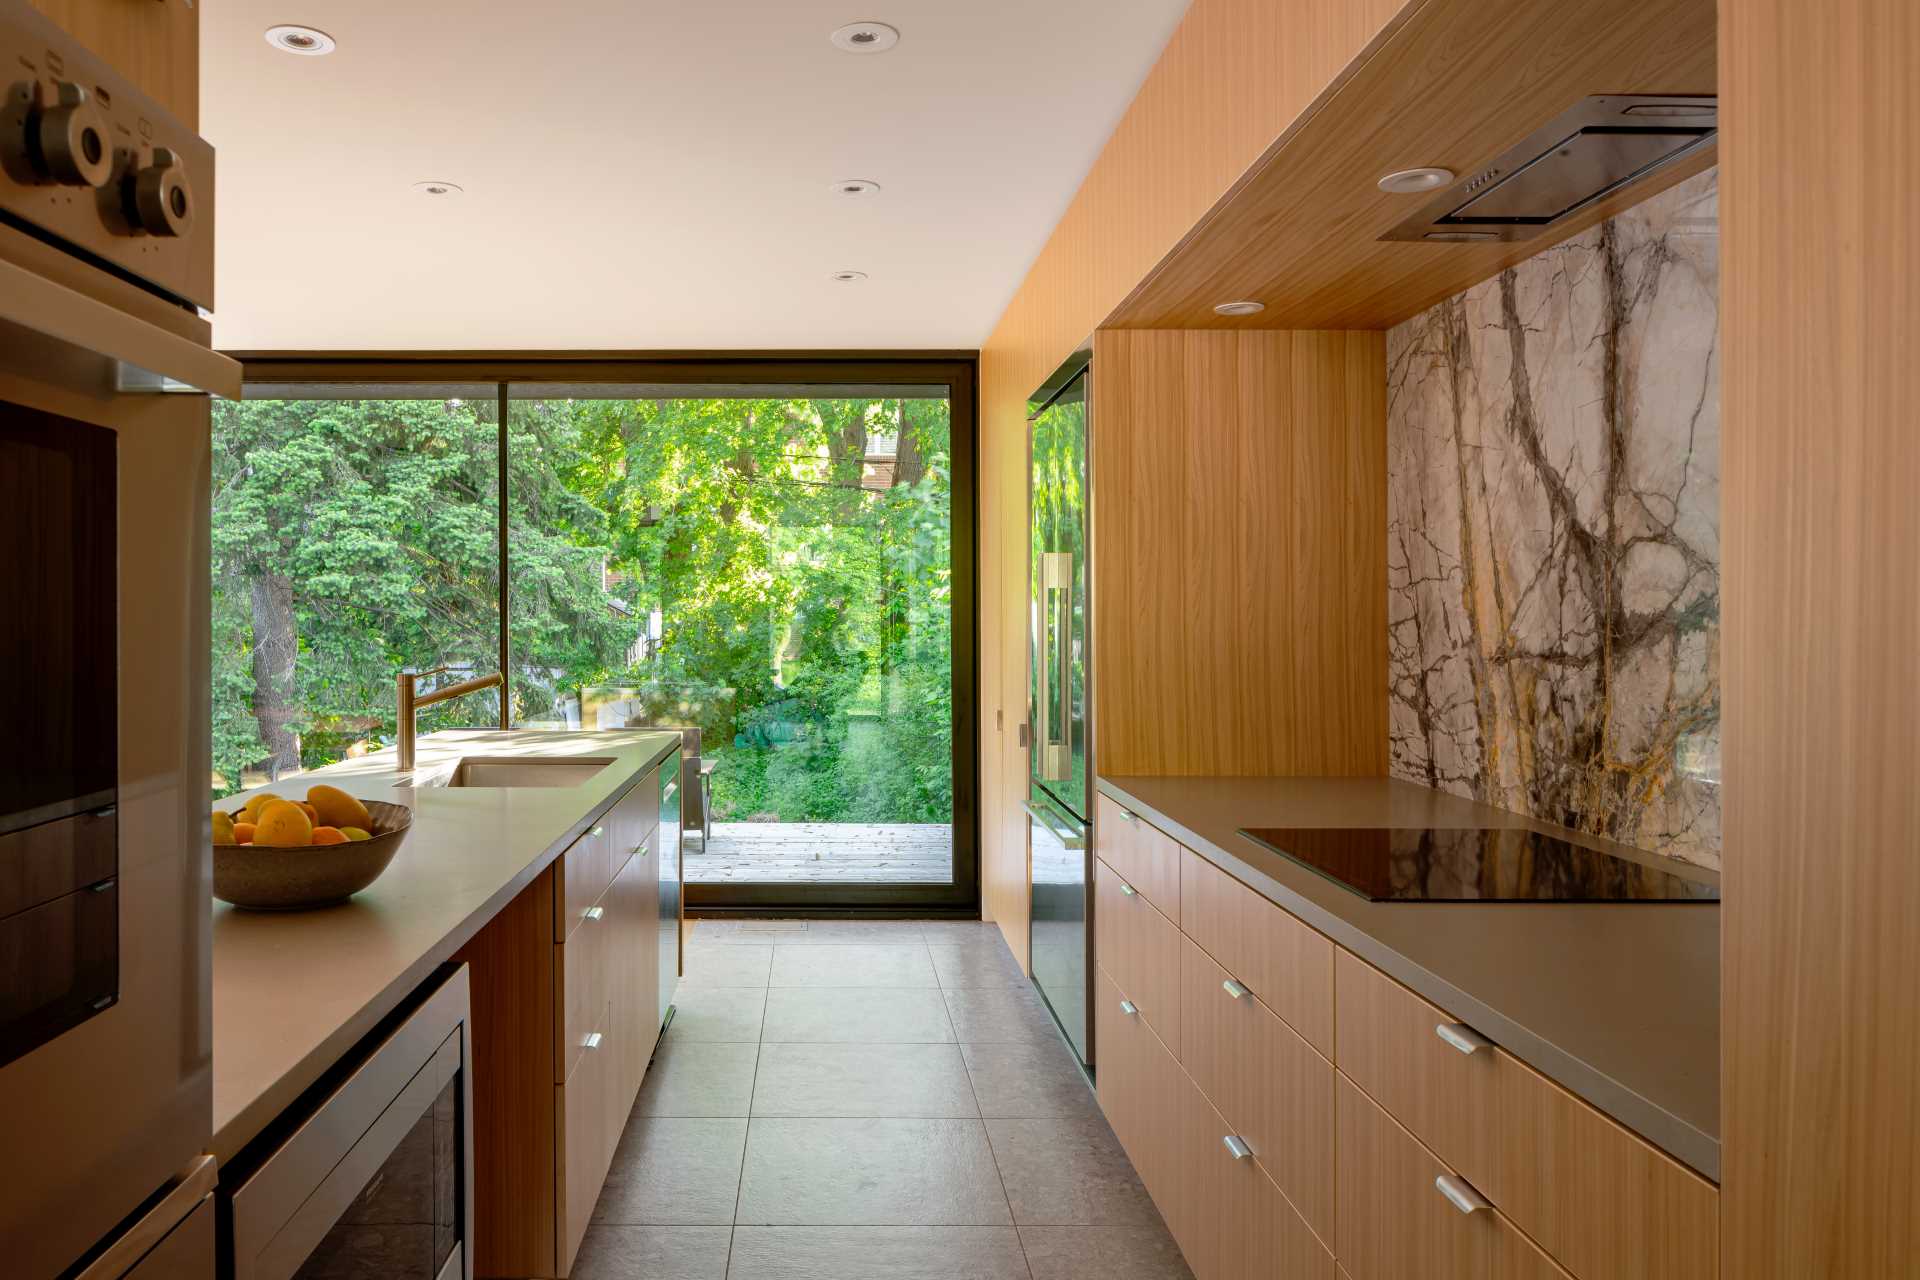 In this kitchen with wood cabinets, large floor-to-ceiling openings provide natural light and views of the green garden areas beyond.